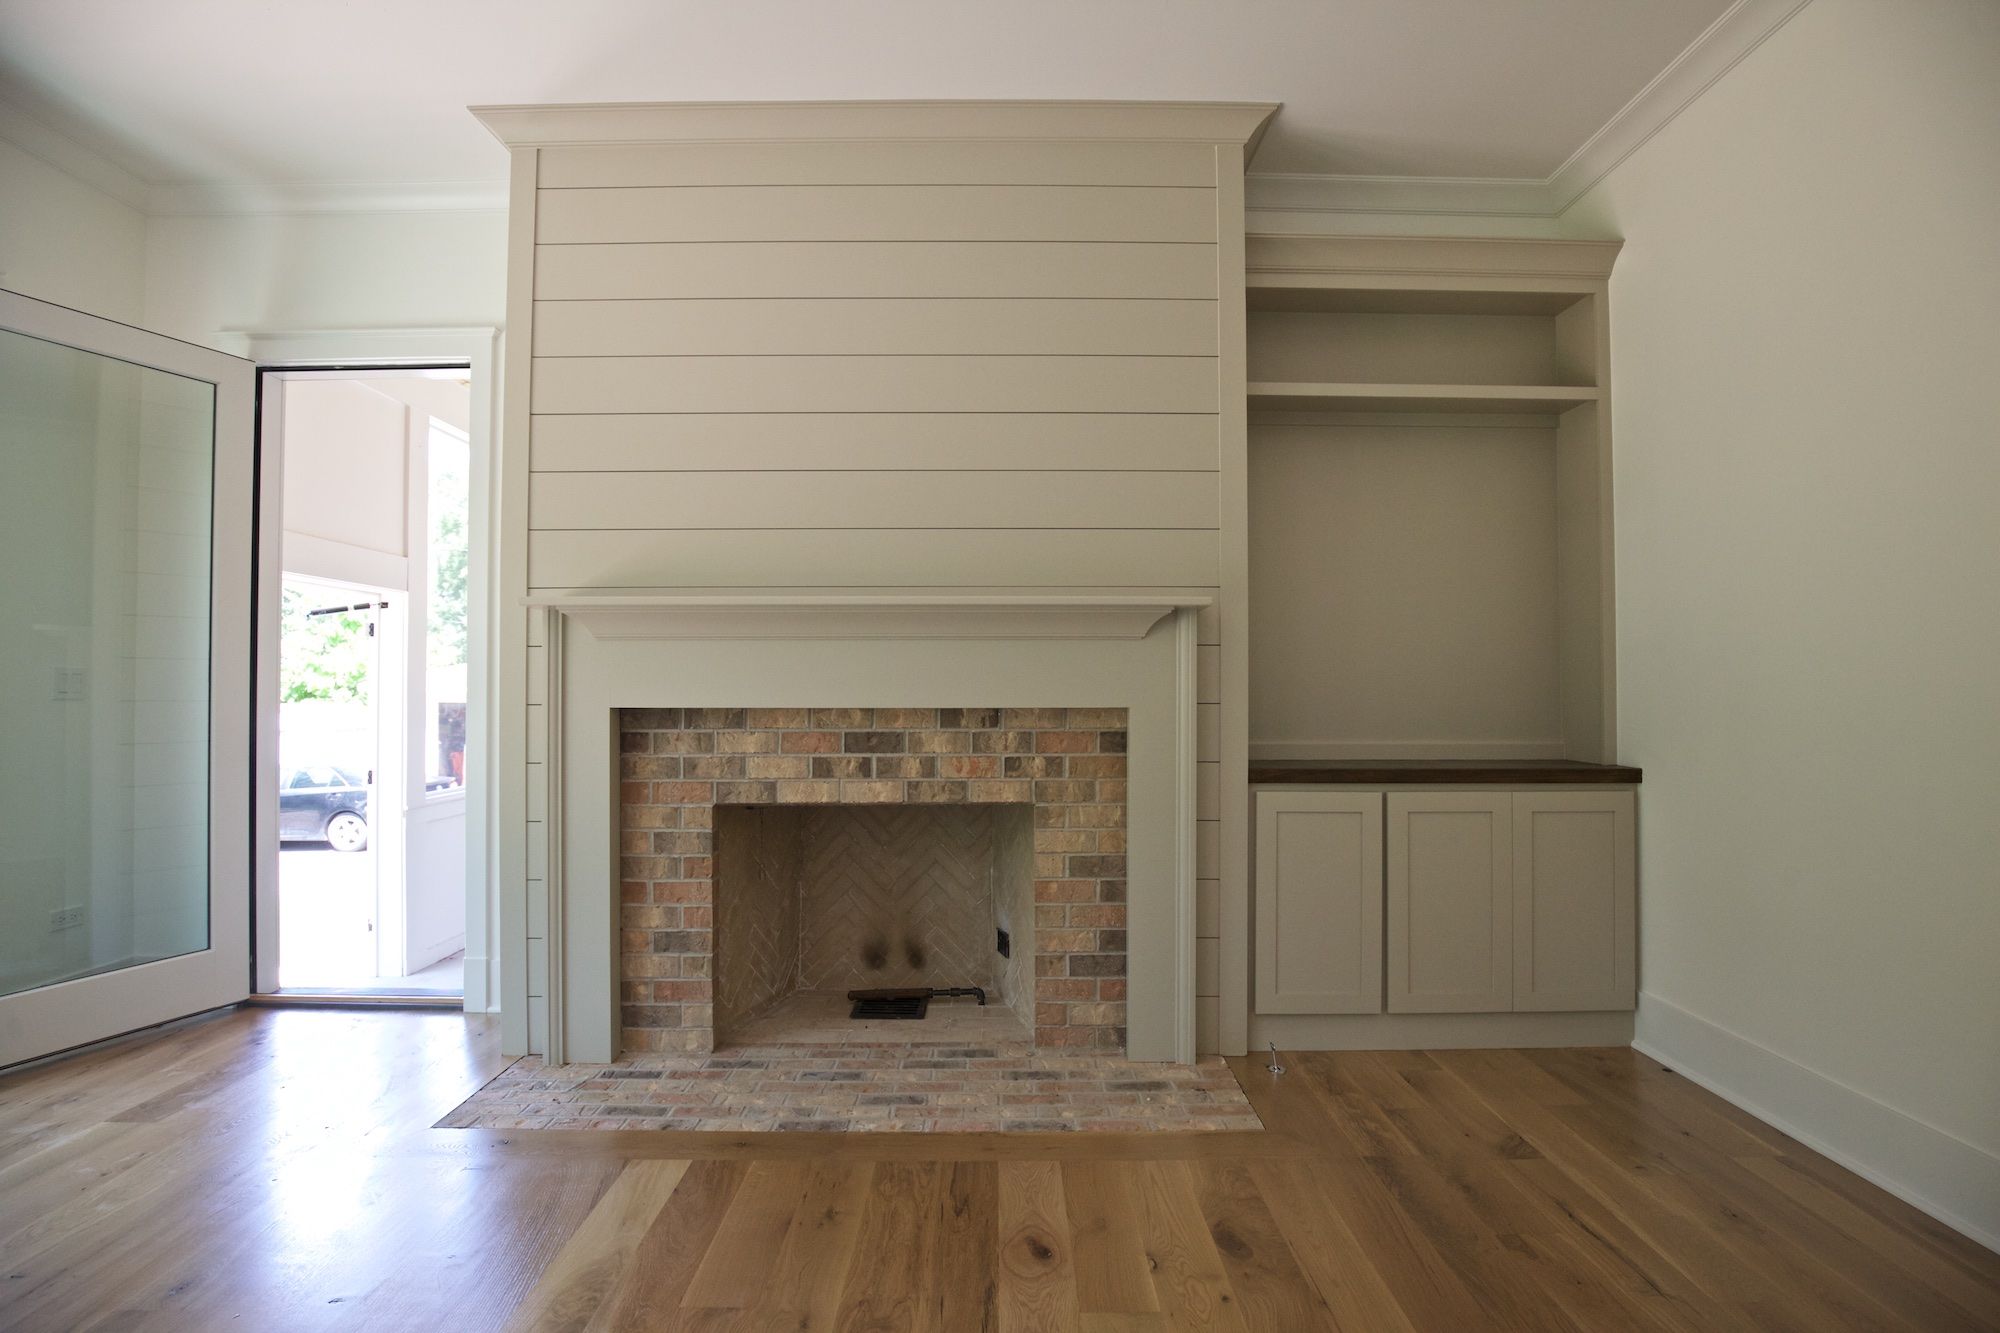 Fireplace Surround Bookshelves New Shiplap Fireplace Surround In Family Room